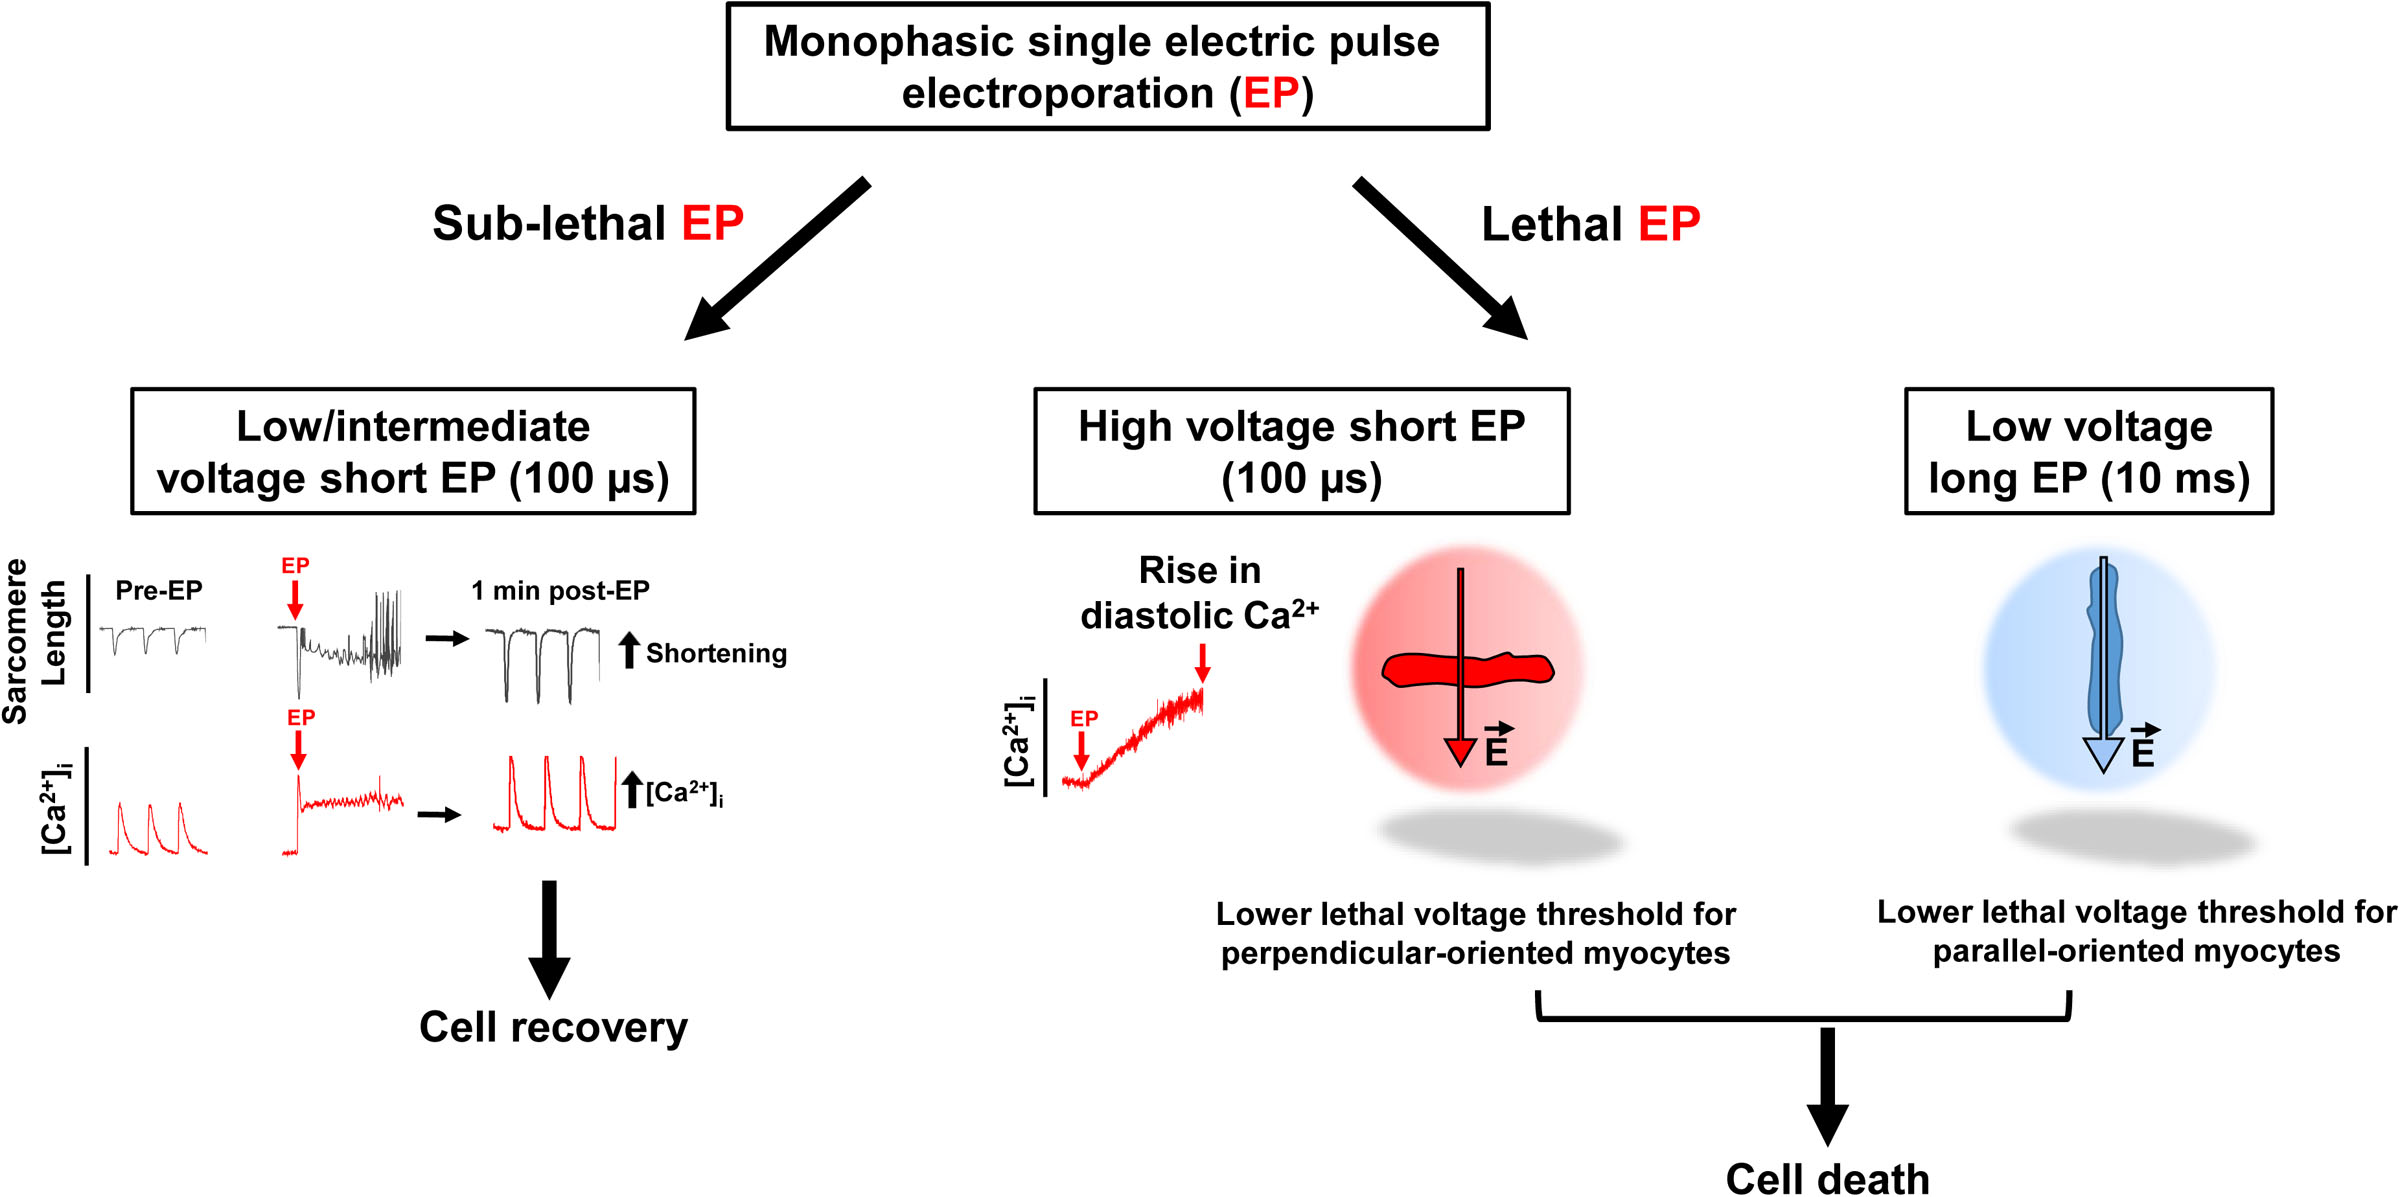 Reversible and Irreversible Effects of Electroporation on Contractility and Calcium Homeostasis in Isolated Cardiac Ventricular Myocytes